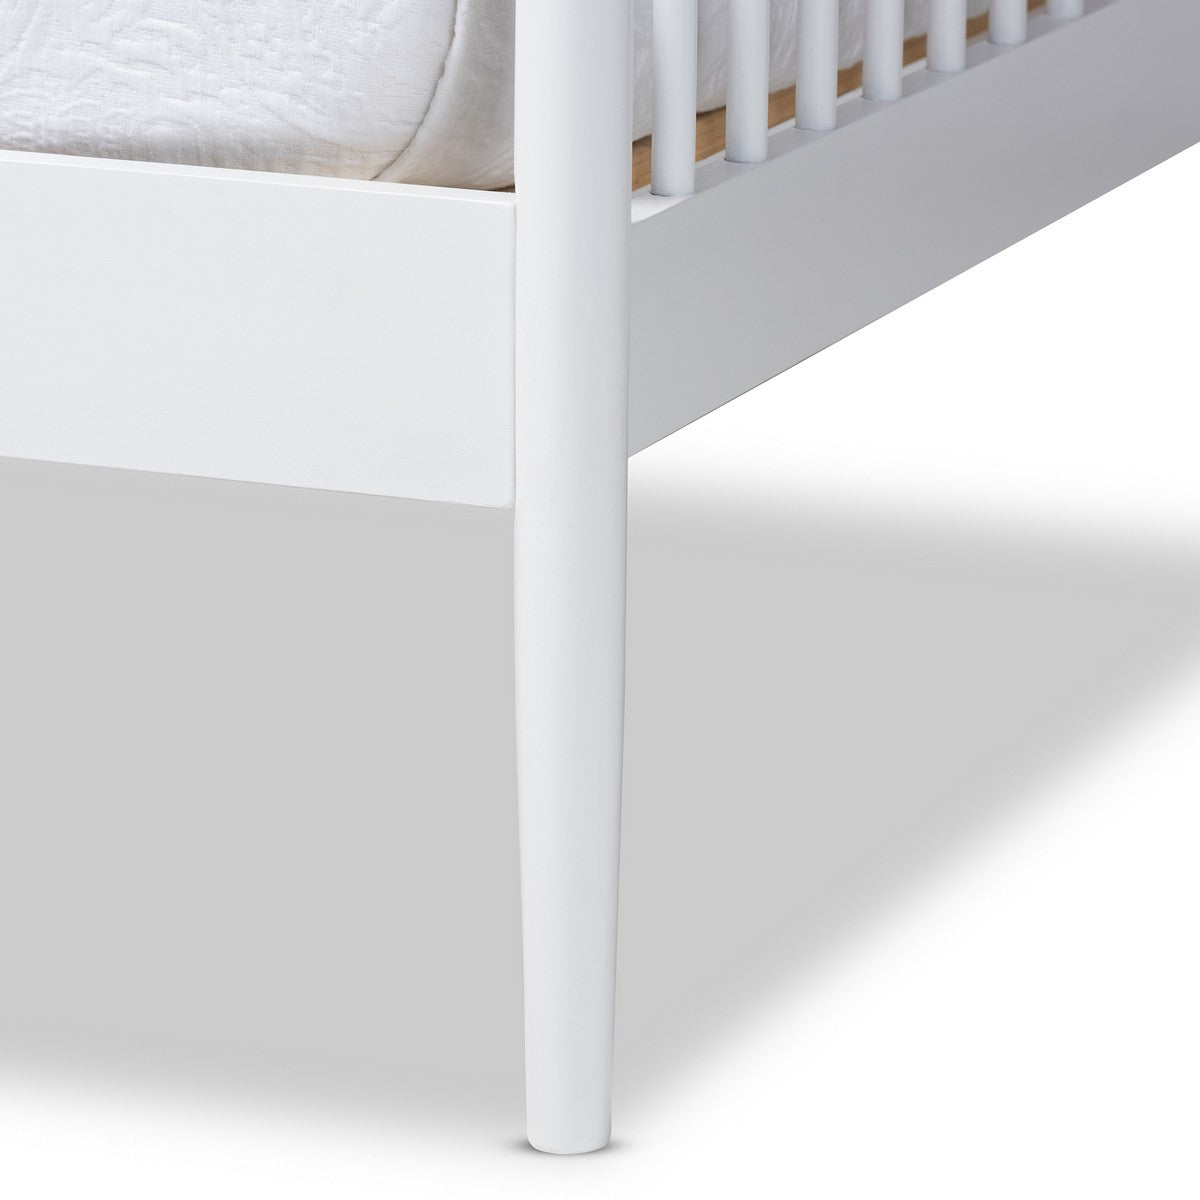 Baxton Studio Renata Classic and Traditional White Finished Wood Twin Size Spindle Daybed